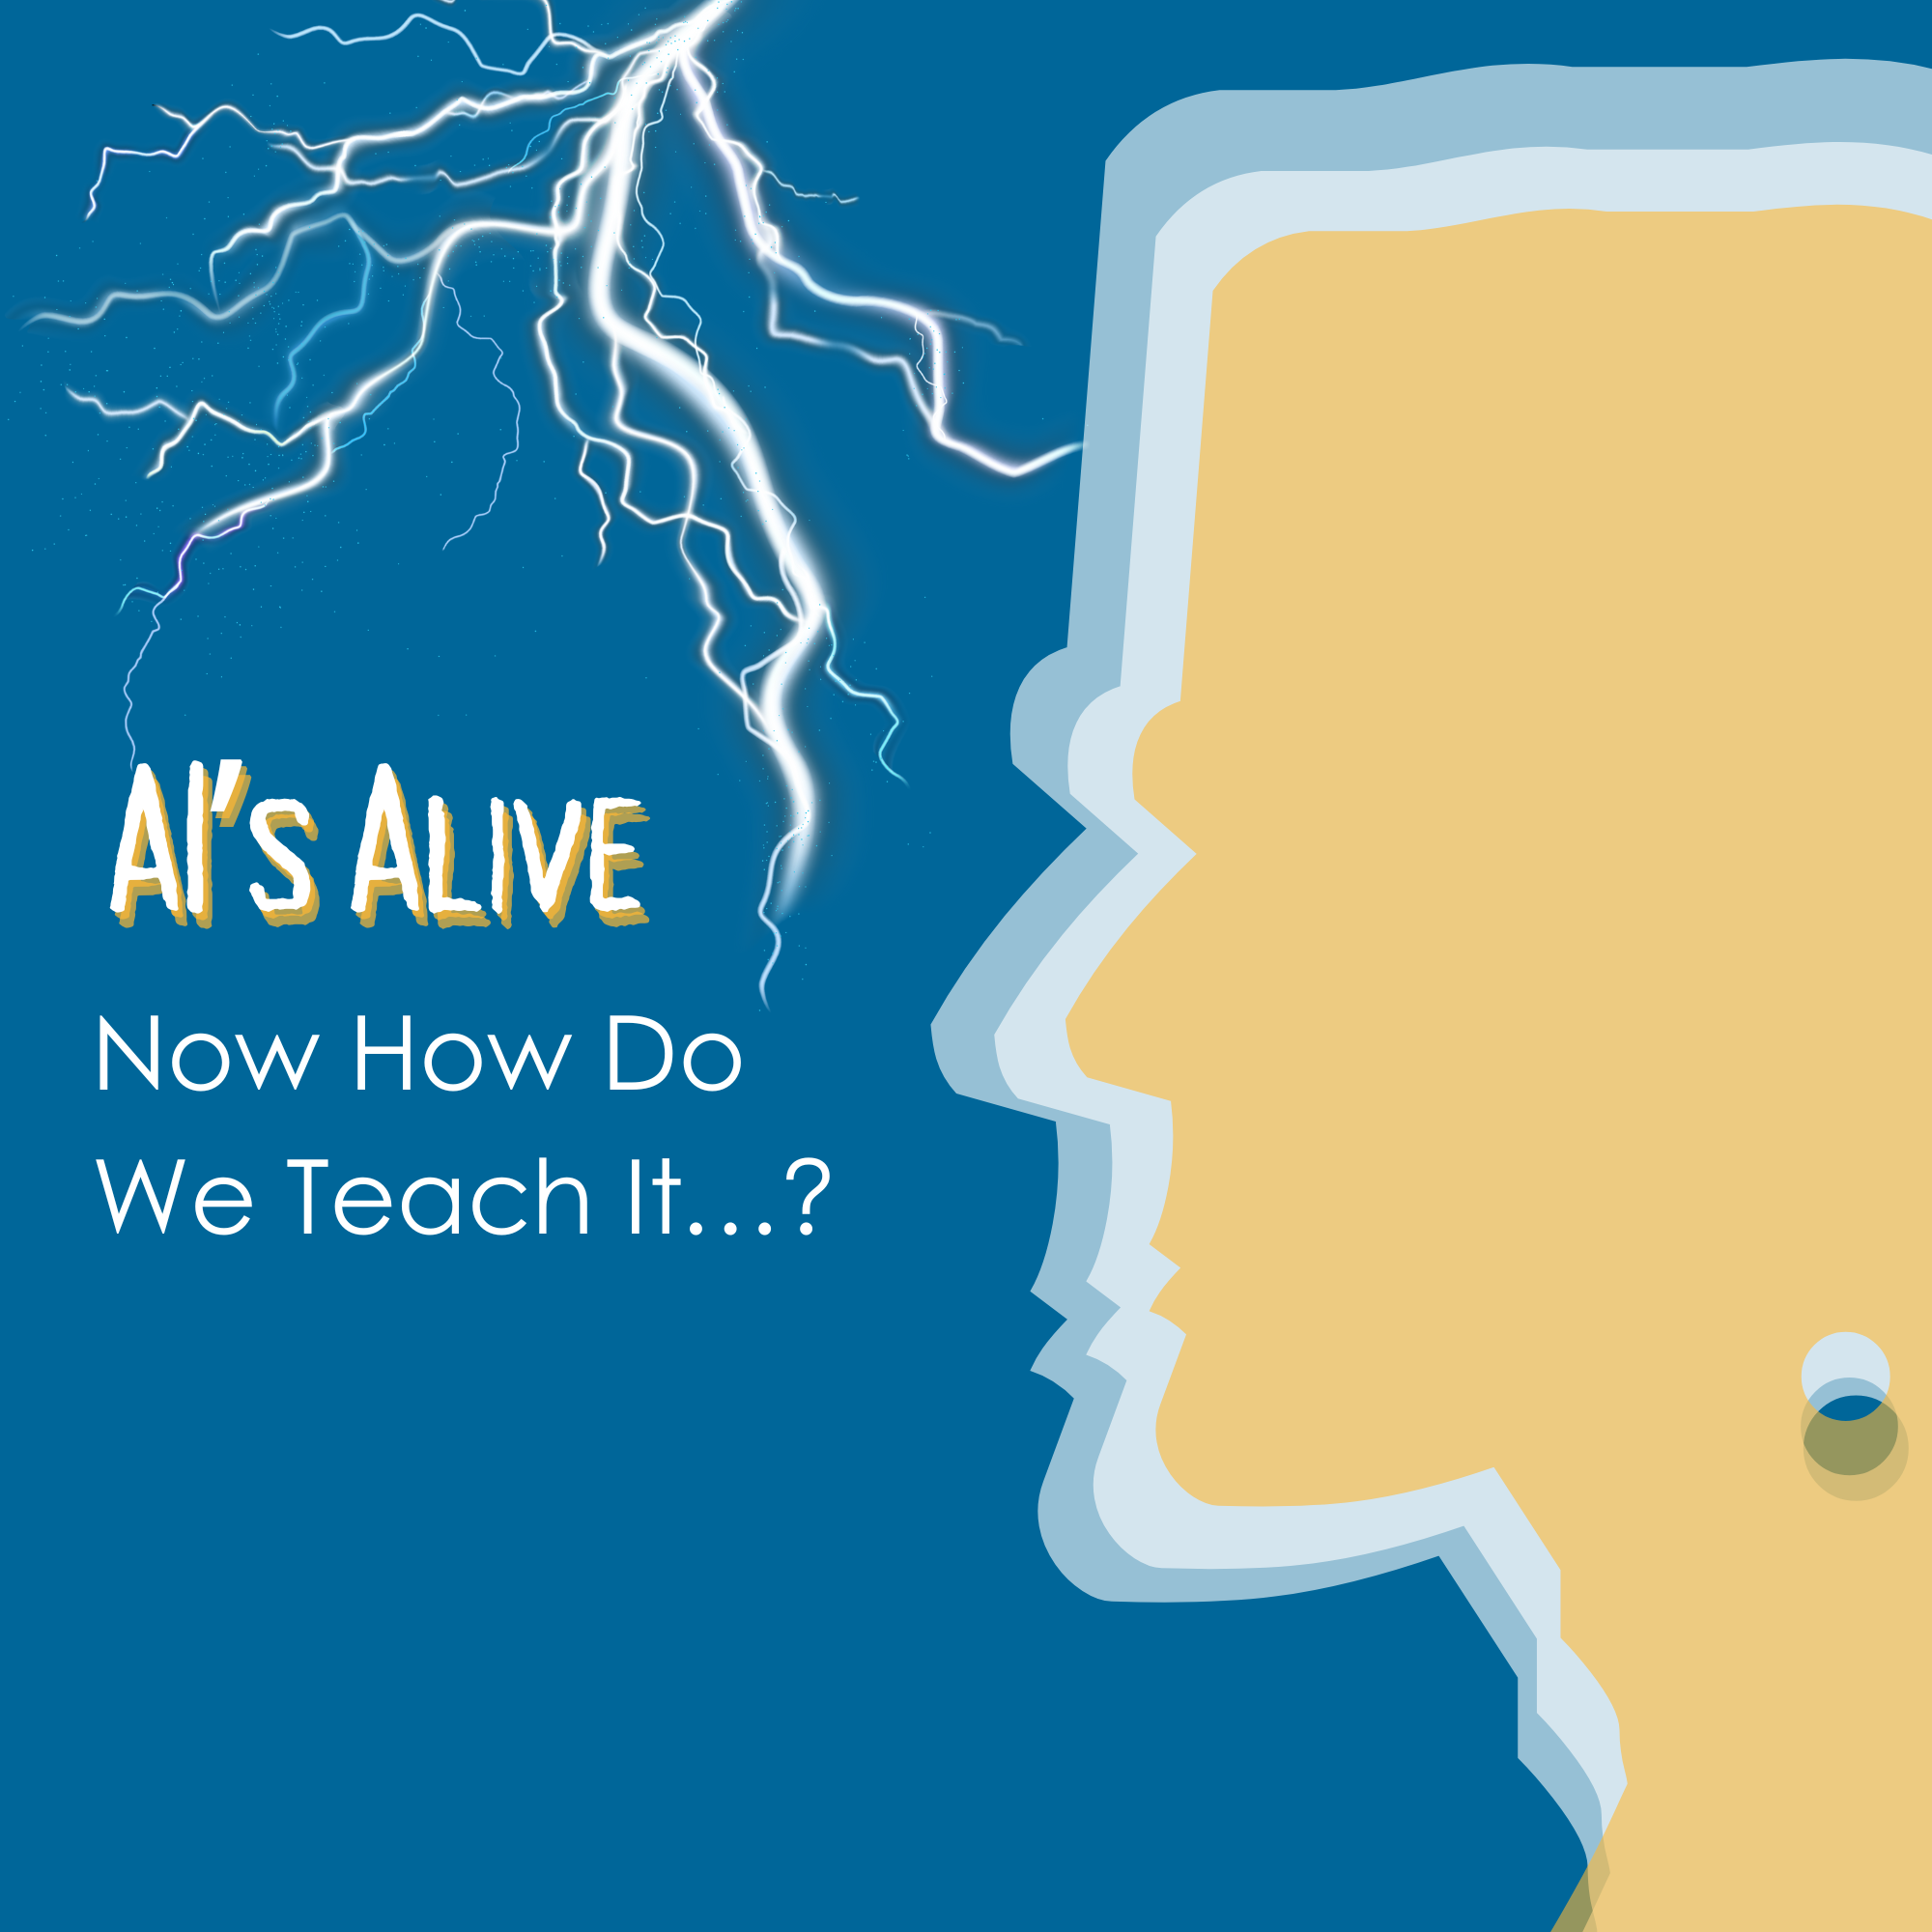 Frankenstein's silhouette on the right side. Lightening striking down the middle with the text on the left: "AI's Alive: Now How Do We Teach it...?"